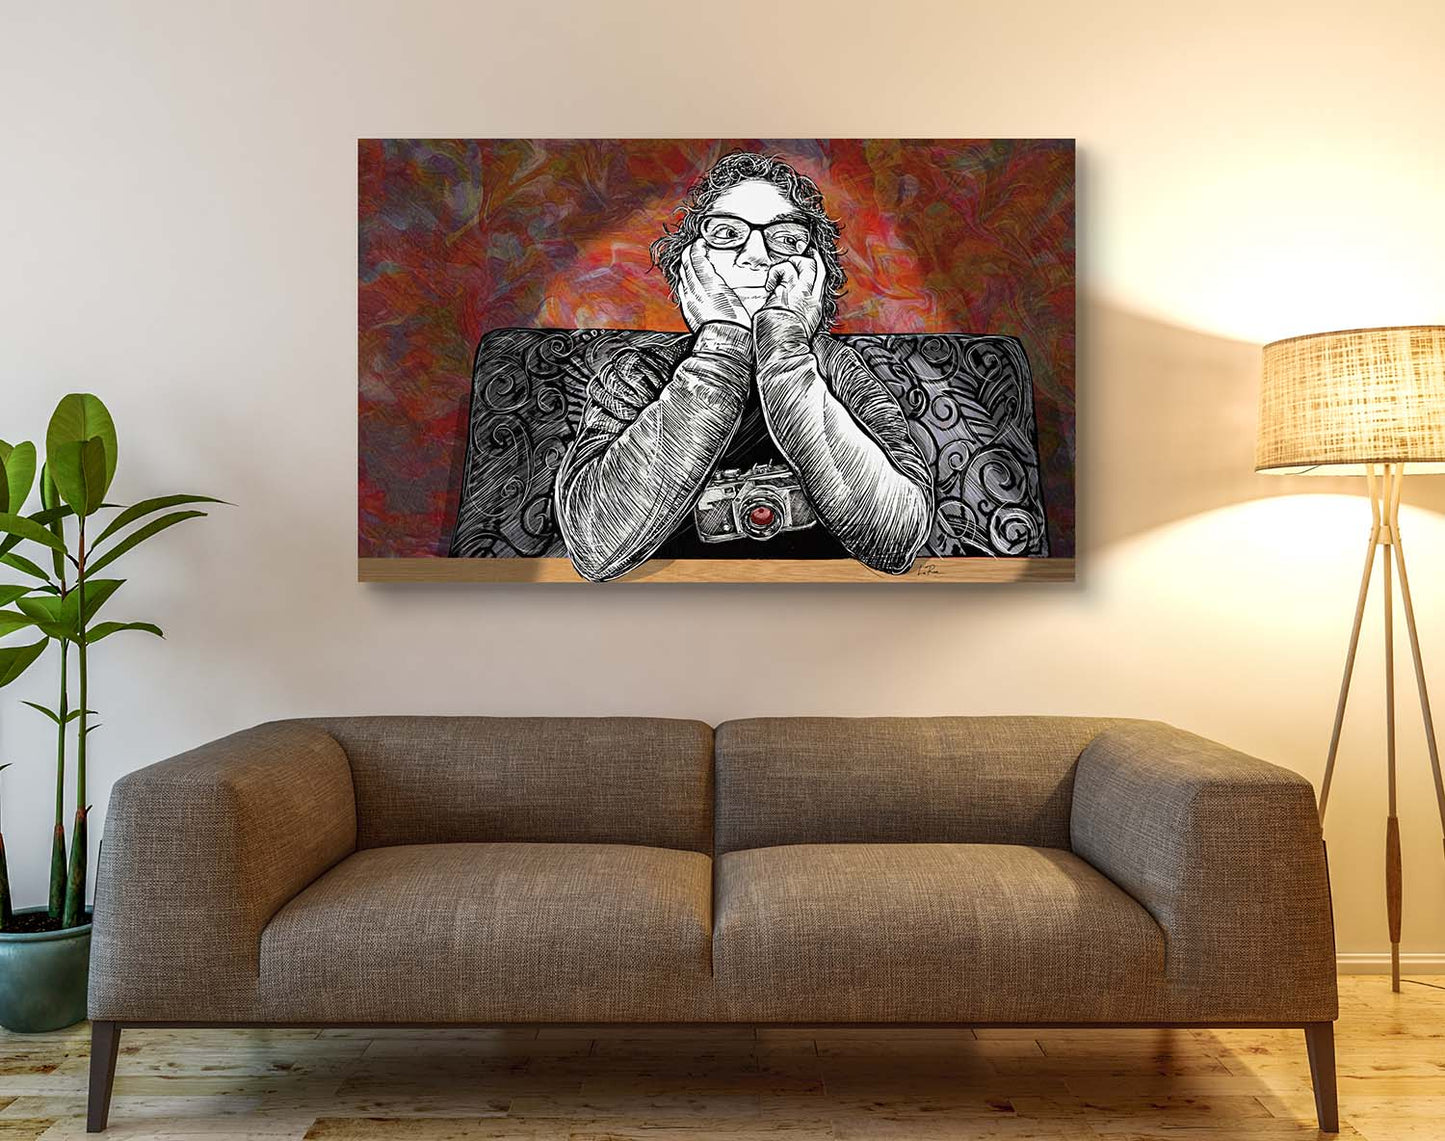 Photographer Laura Rojo portrait by Doug LaRue  large canvas print on a wall above a couch